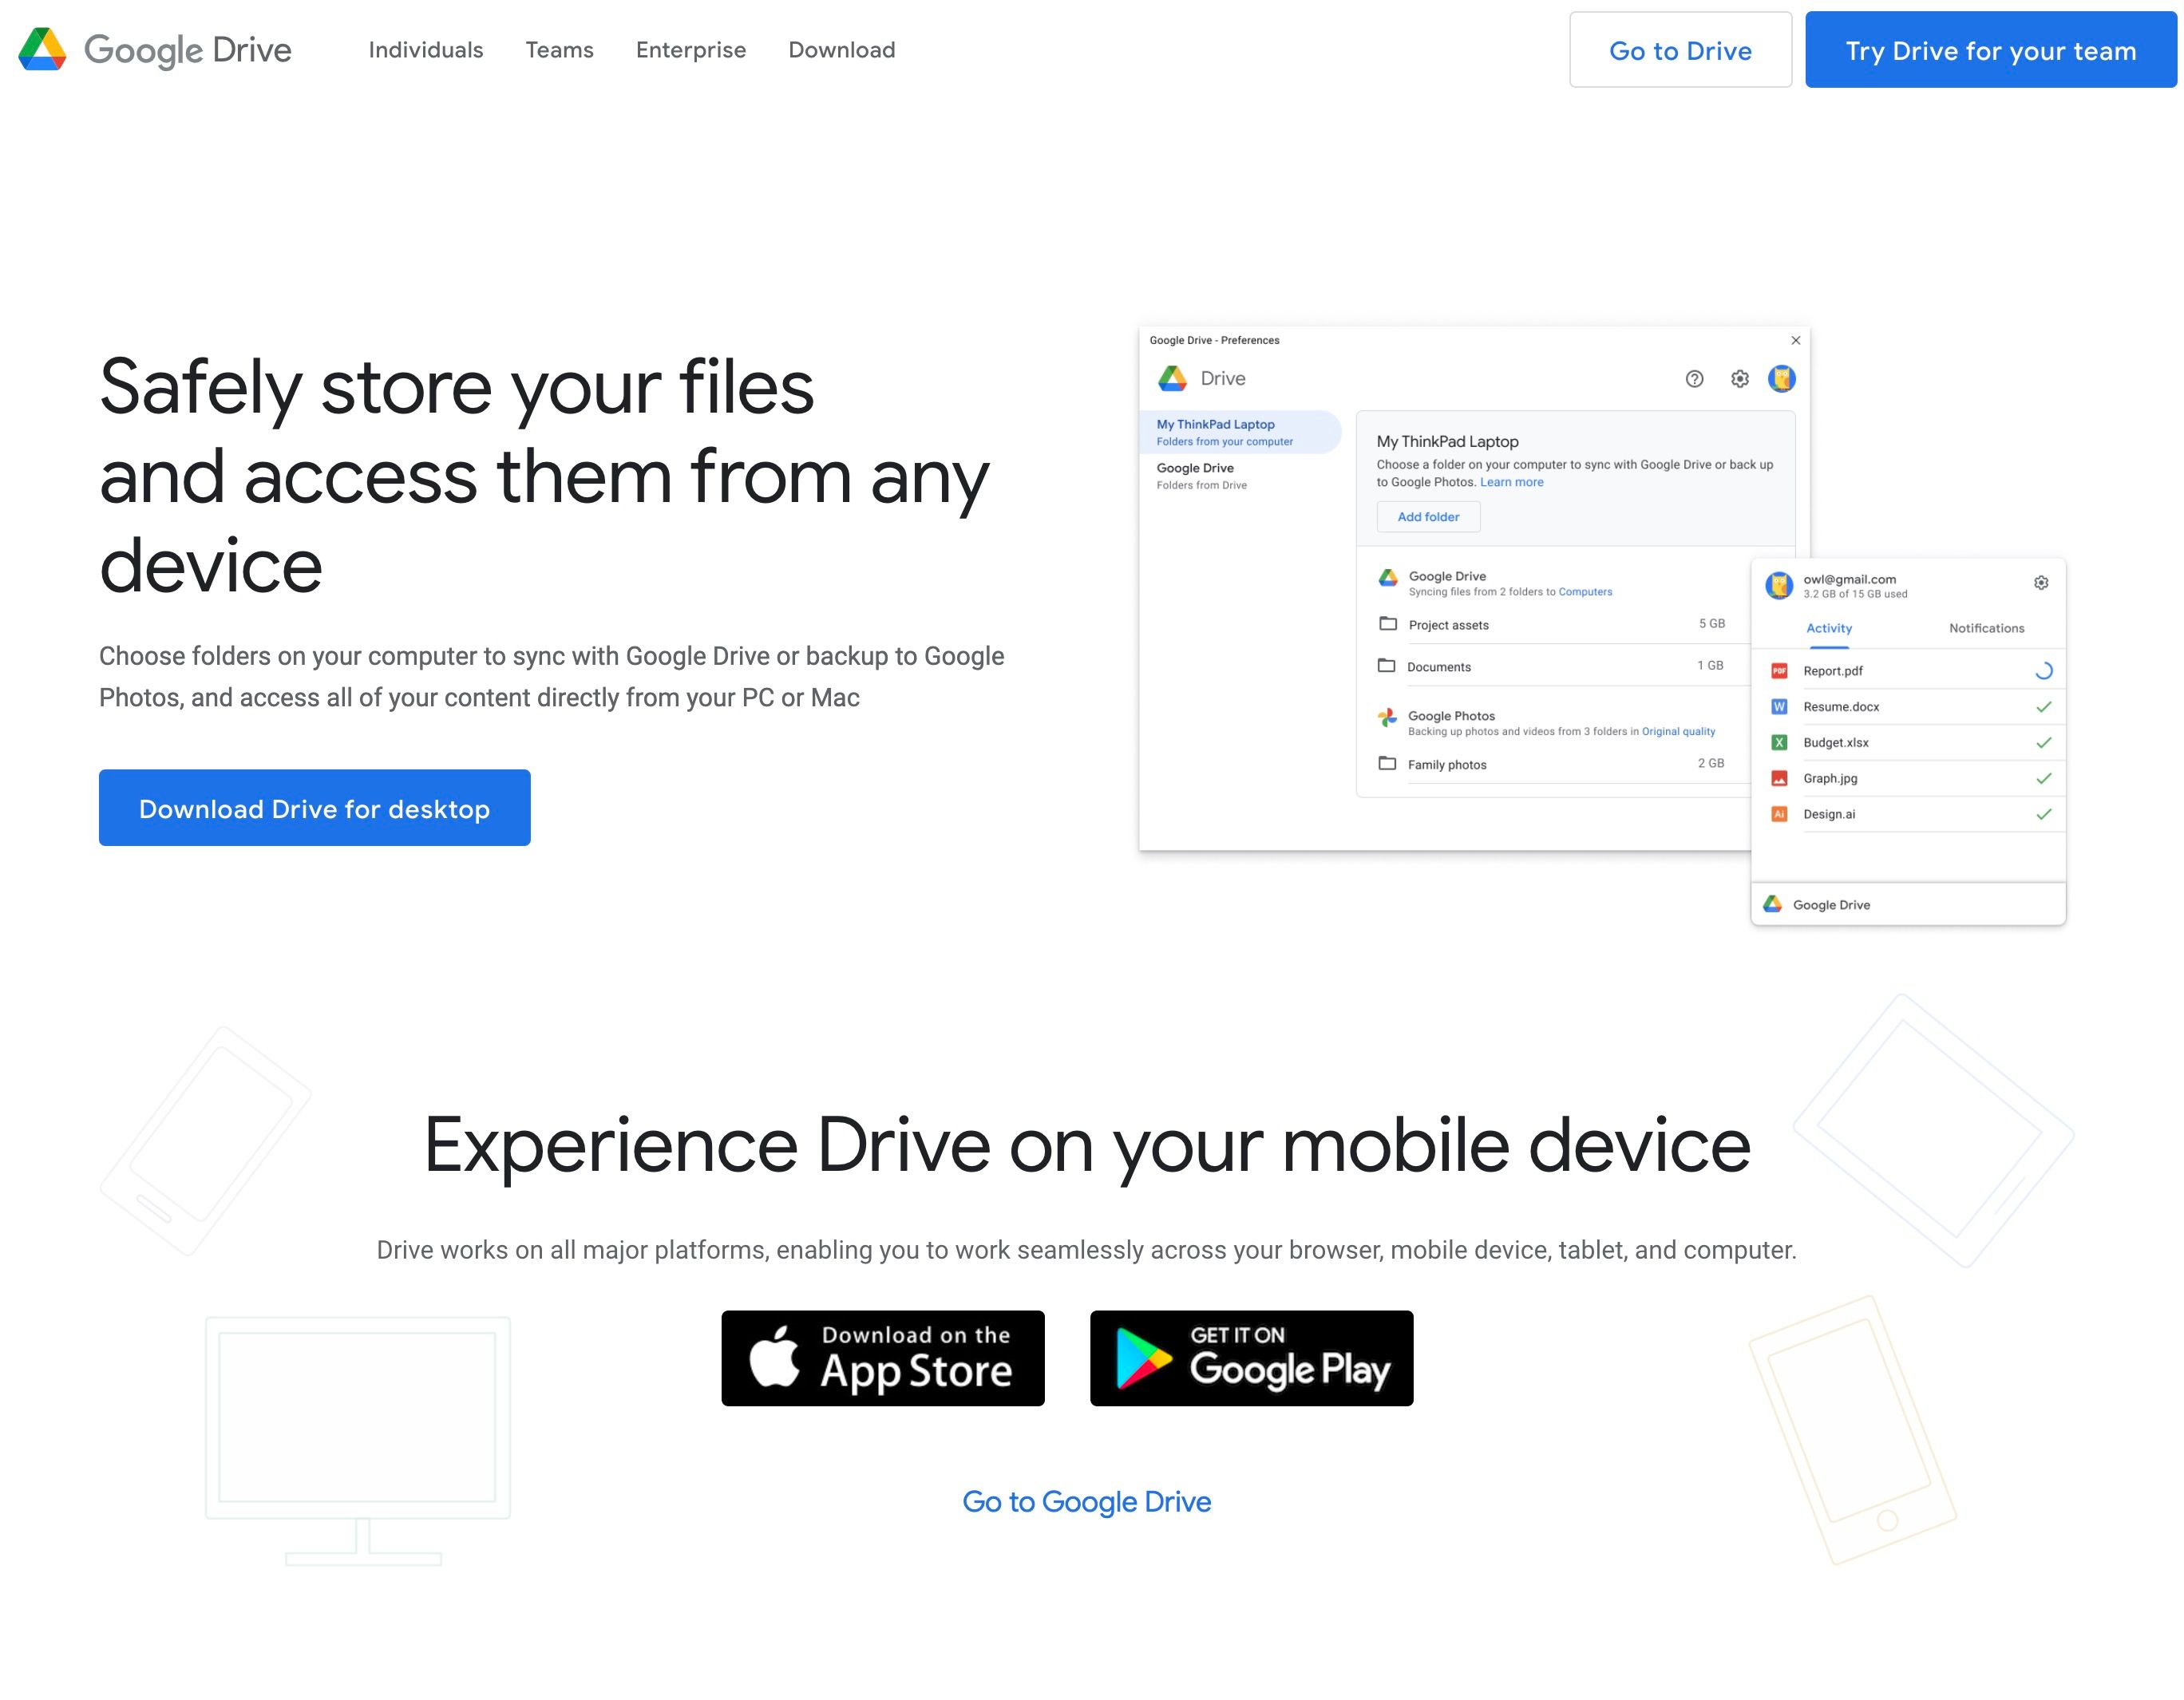 A Page for Google Drive that includes a 'Download Drive for desktop' button, images of Google Drive's interface on a computer screen, and options to download the mobile app from the App Store and Google Play.